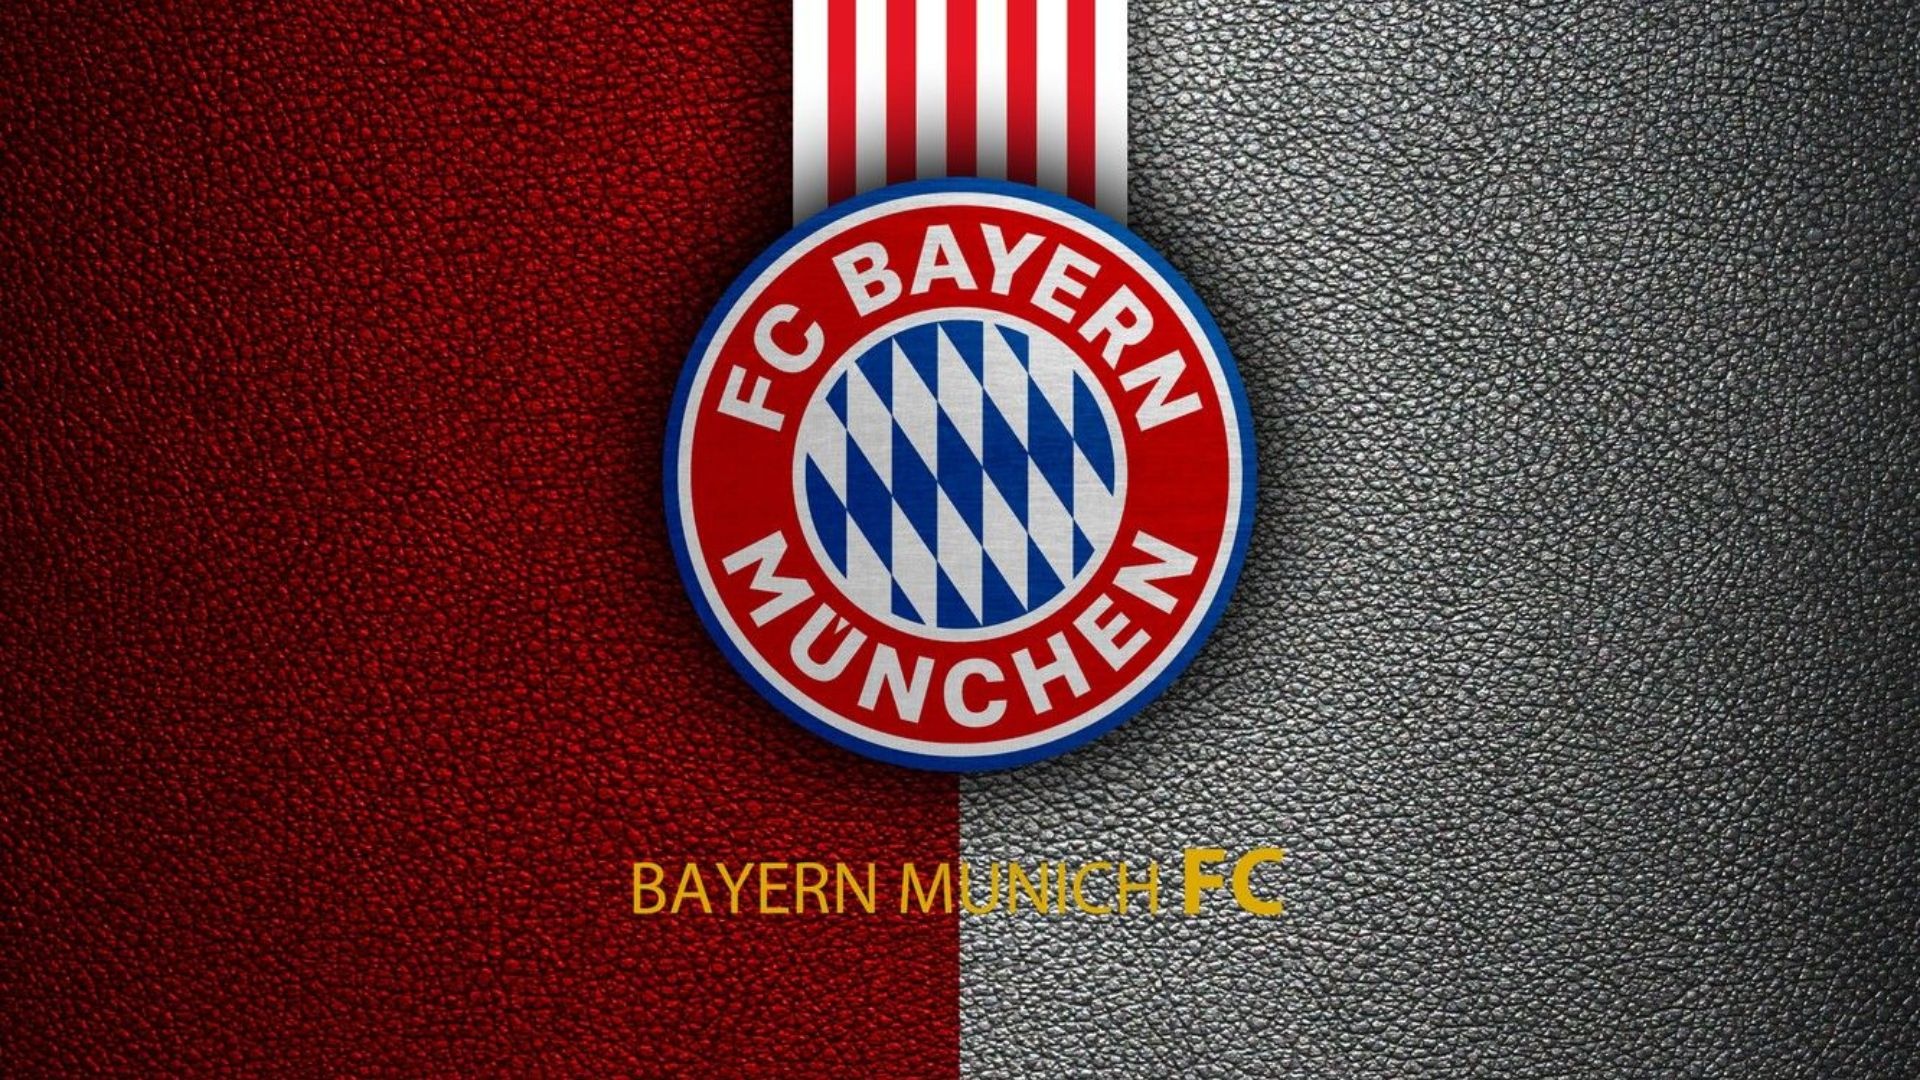 Bayern Munchen FC: Ranked first in UEFA club rankings as of May 2022. 1920x1080 Full HD Wallpaper.